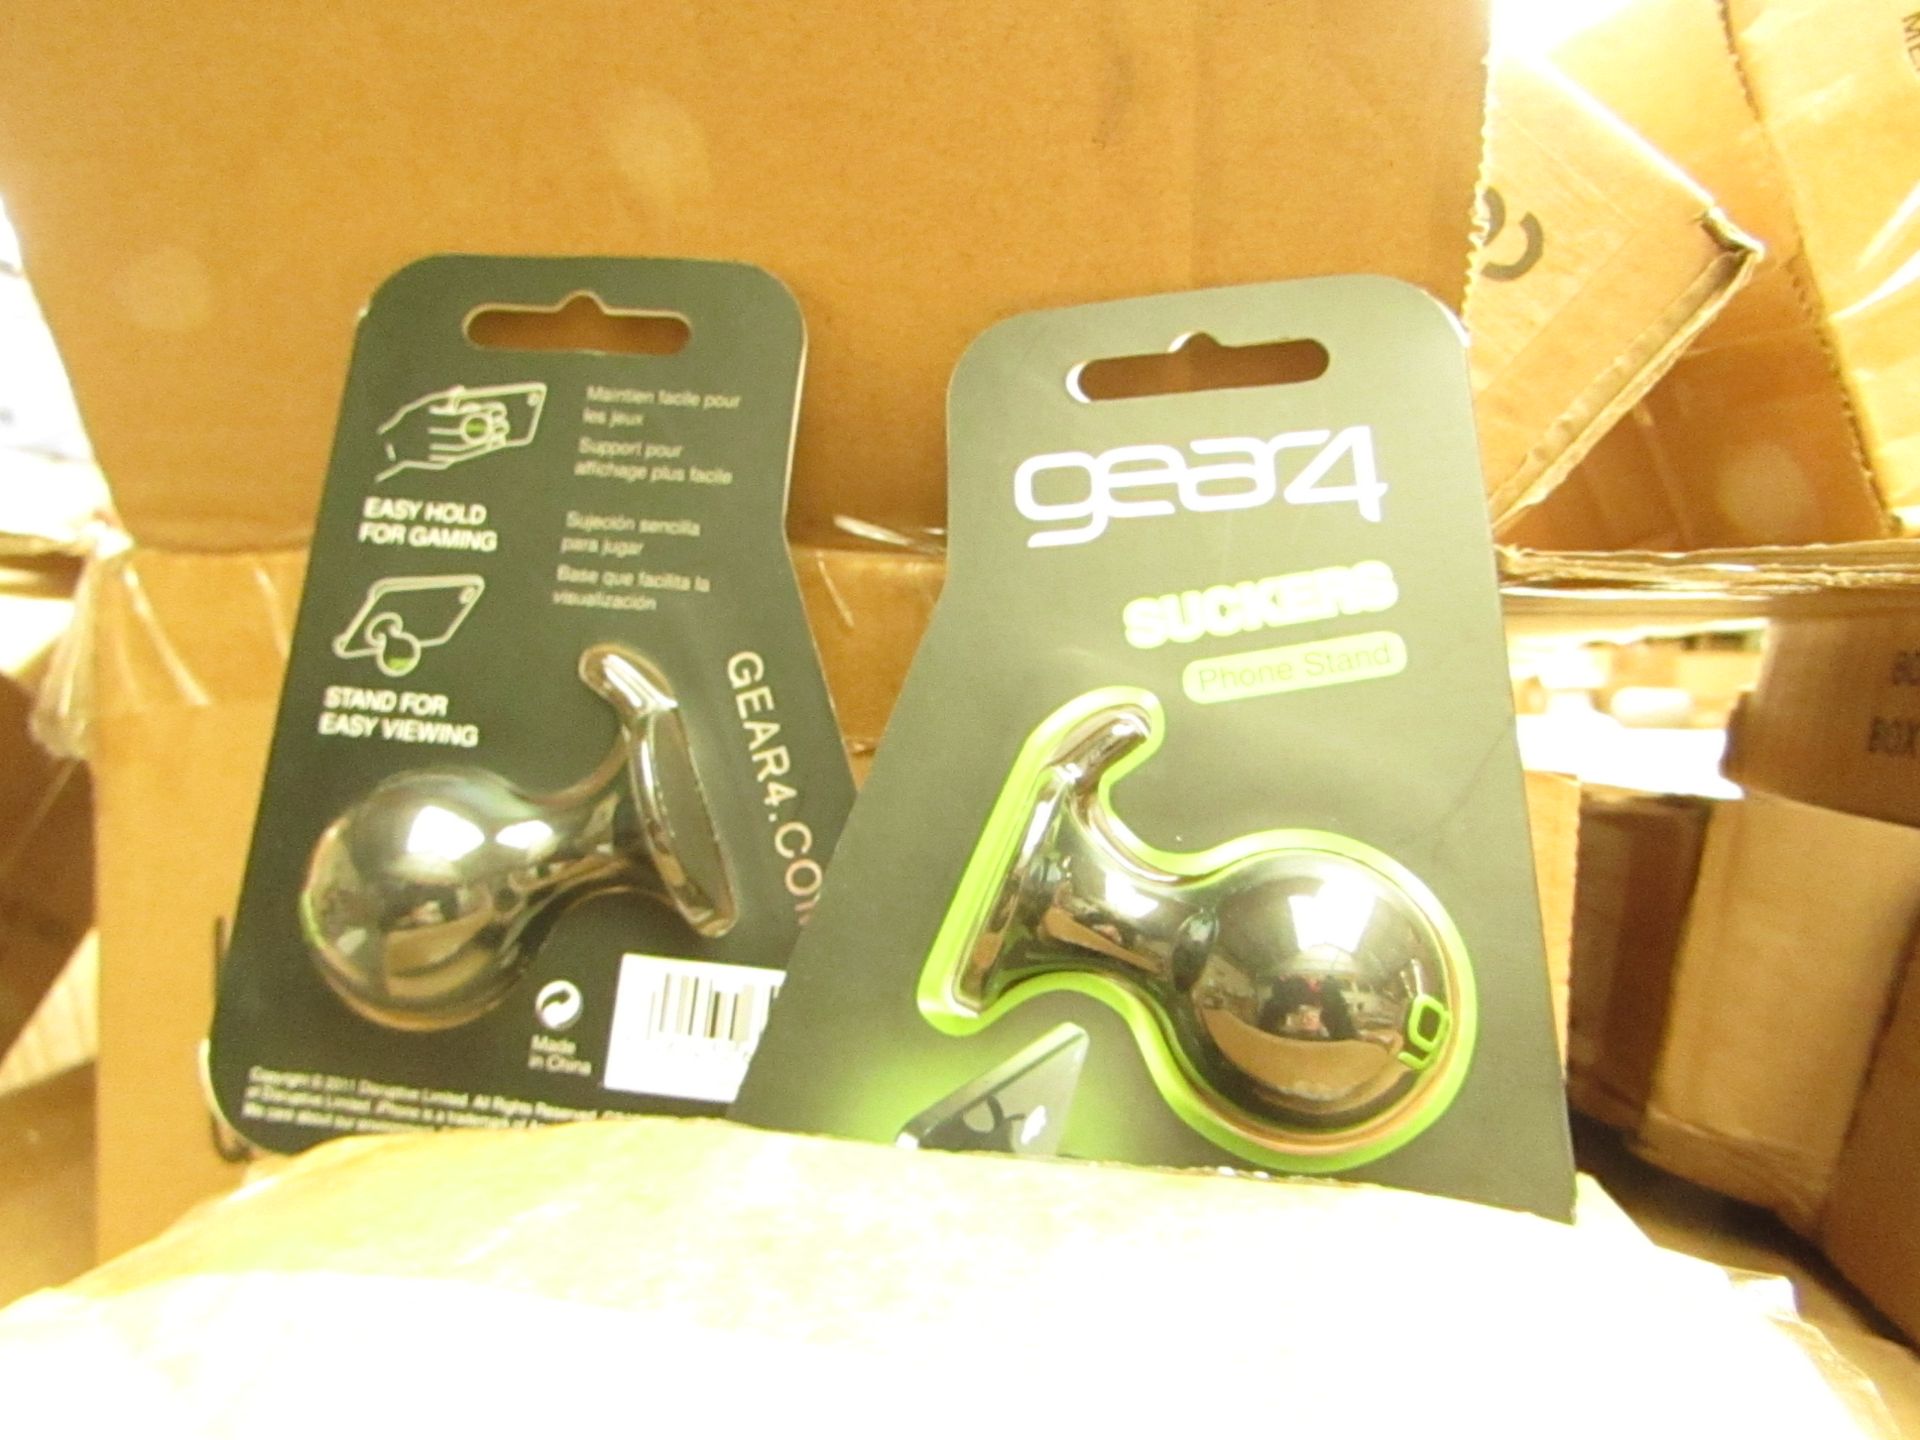 10x Gear 4 phone stands, new and boxed.